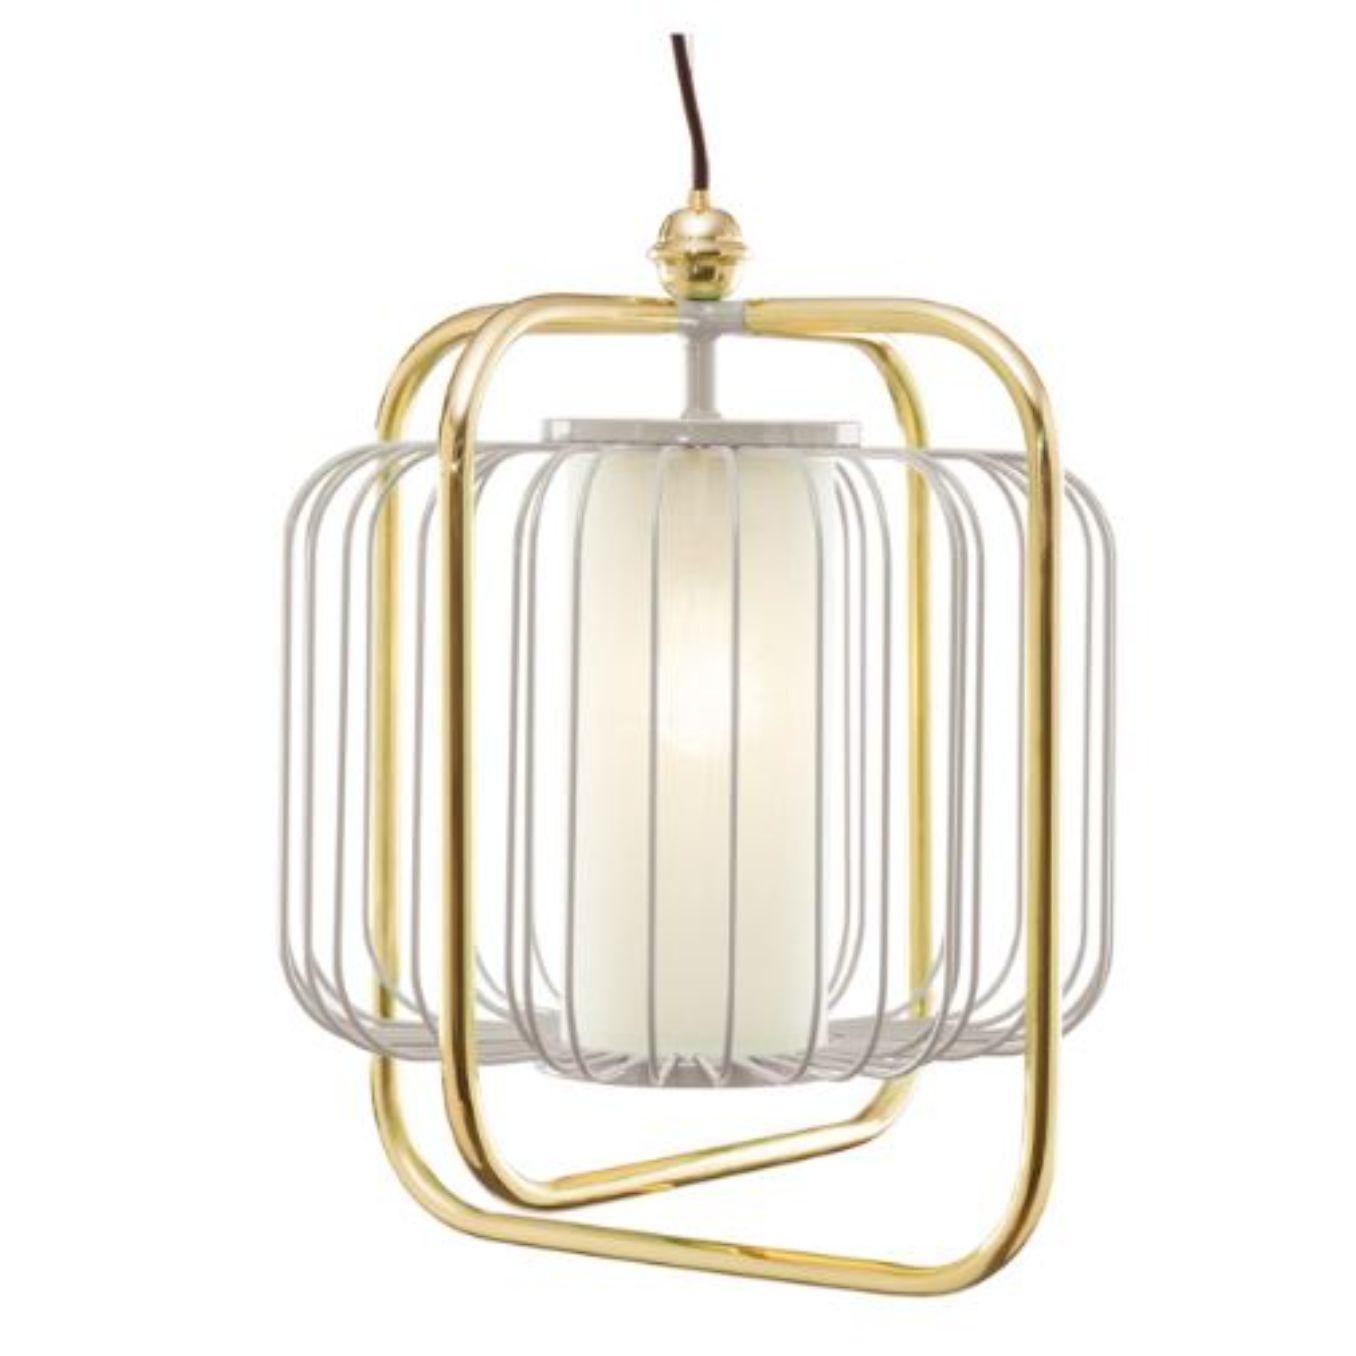 Brass and Salmon Jules III Suspension Lamp by Dooq For Sale 2